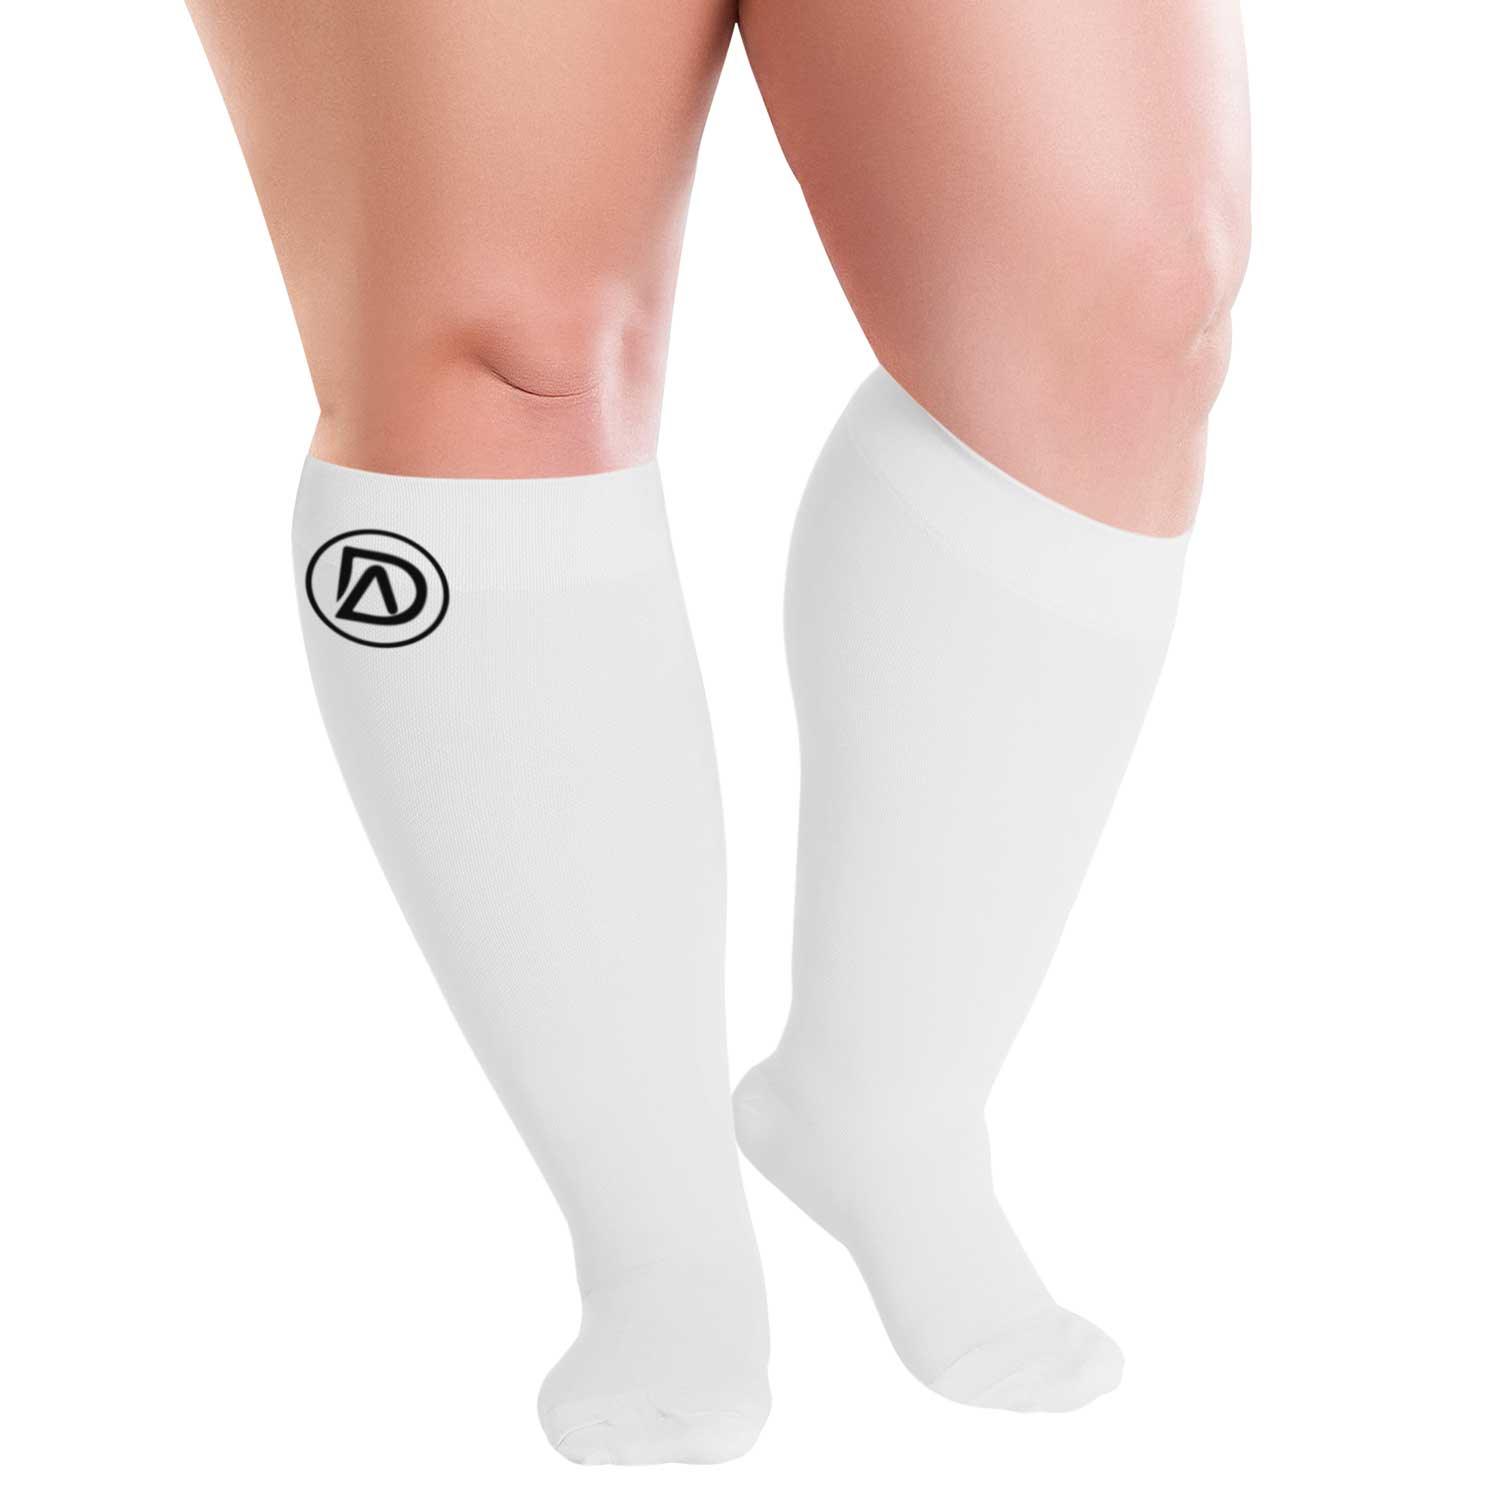 Plus Size Compression Socks  Wide Calf by Dominion Active 20-30 mmHg –  TheGivenGet